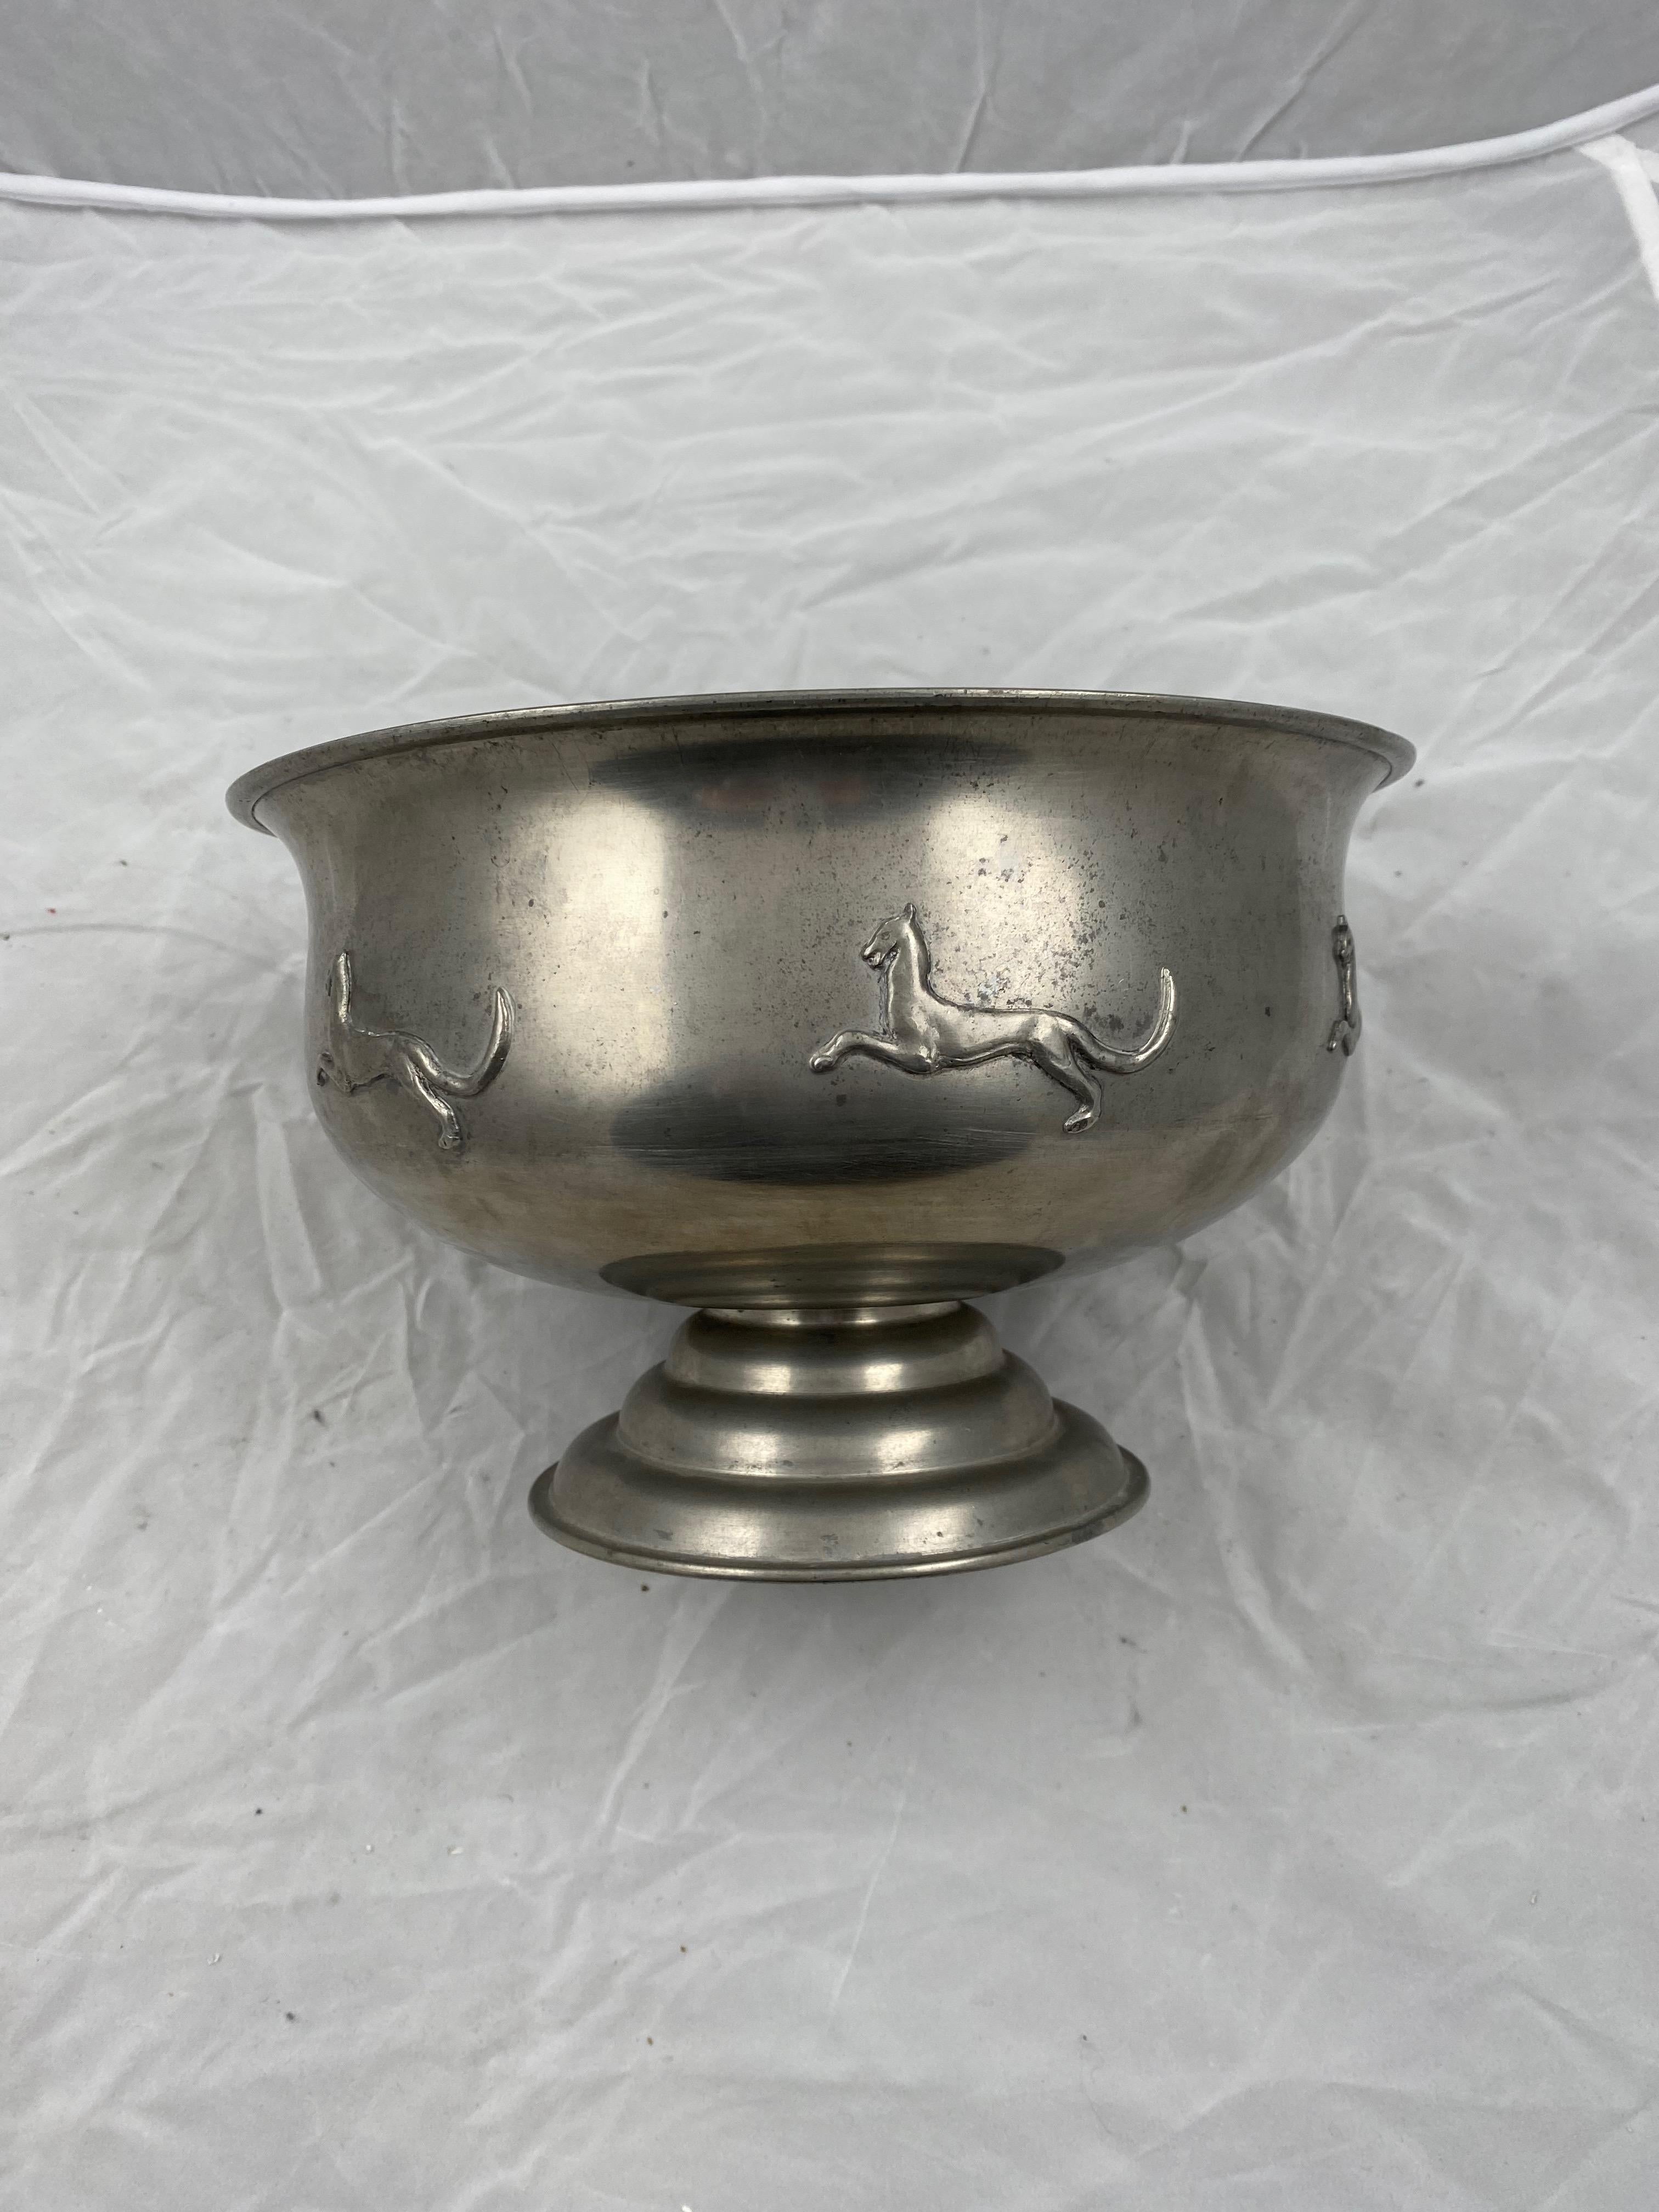 A large pewter bowl made by the company Svenskt Tenn, 1928. With decorations of running lions. Swedish grace.